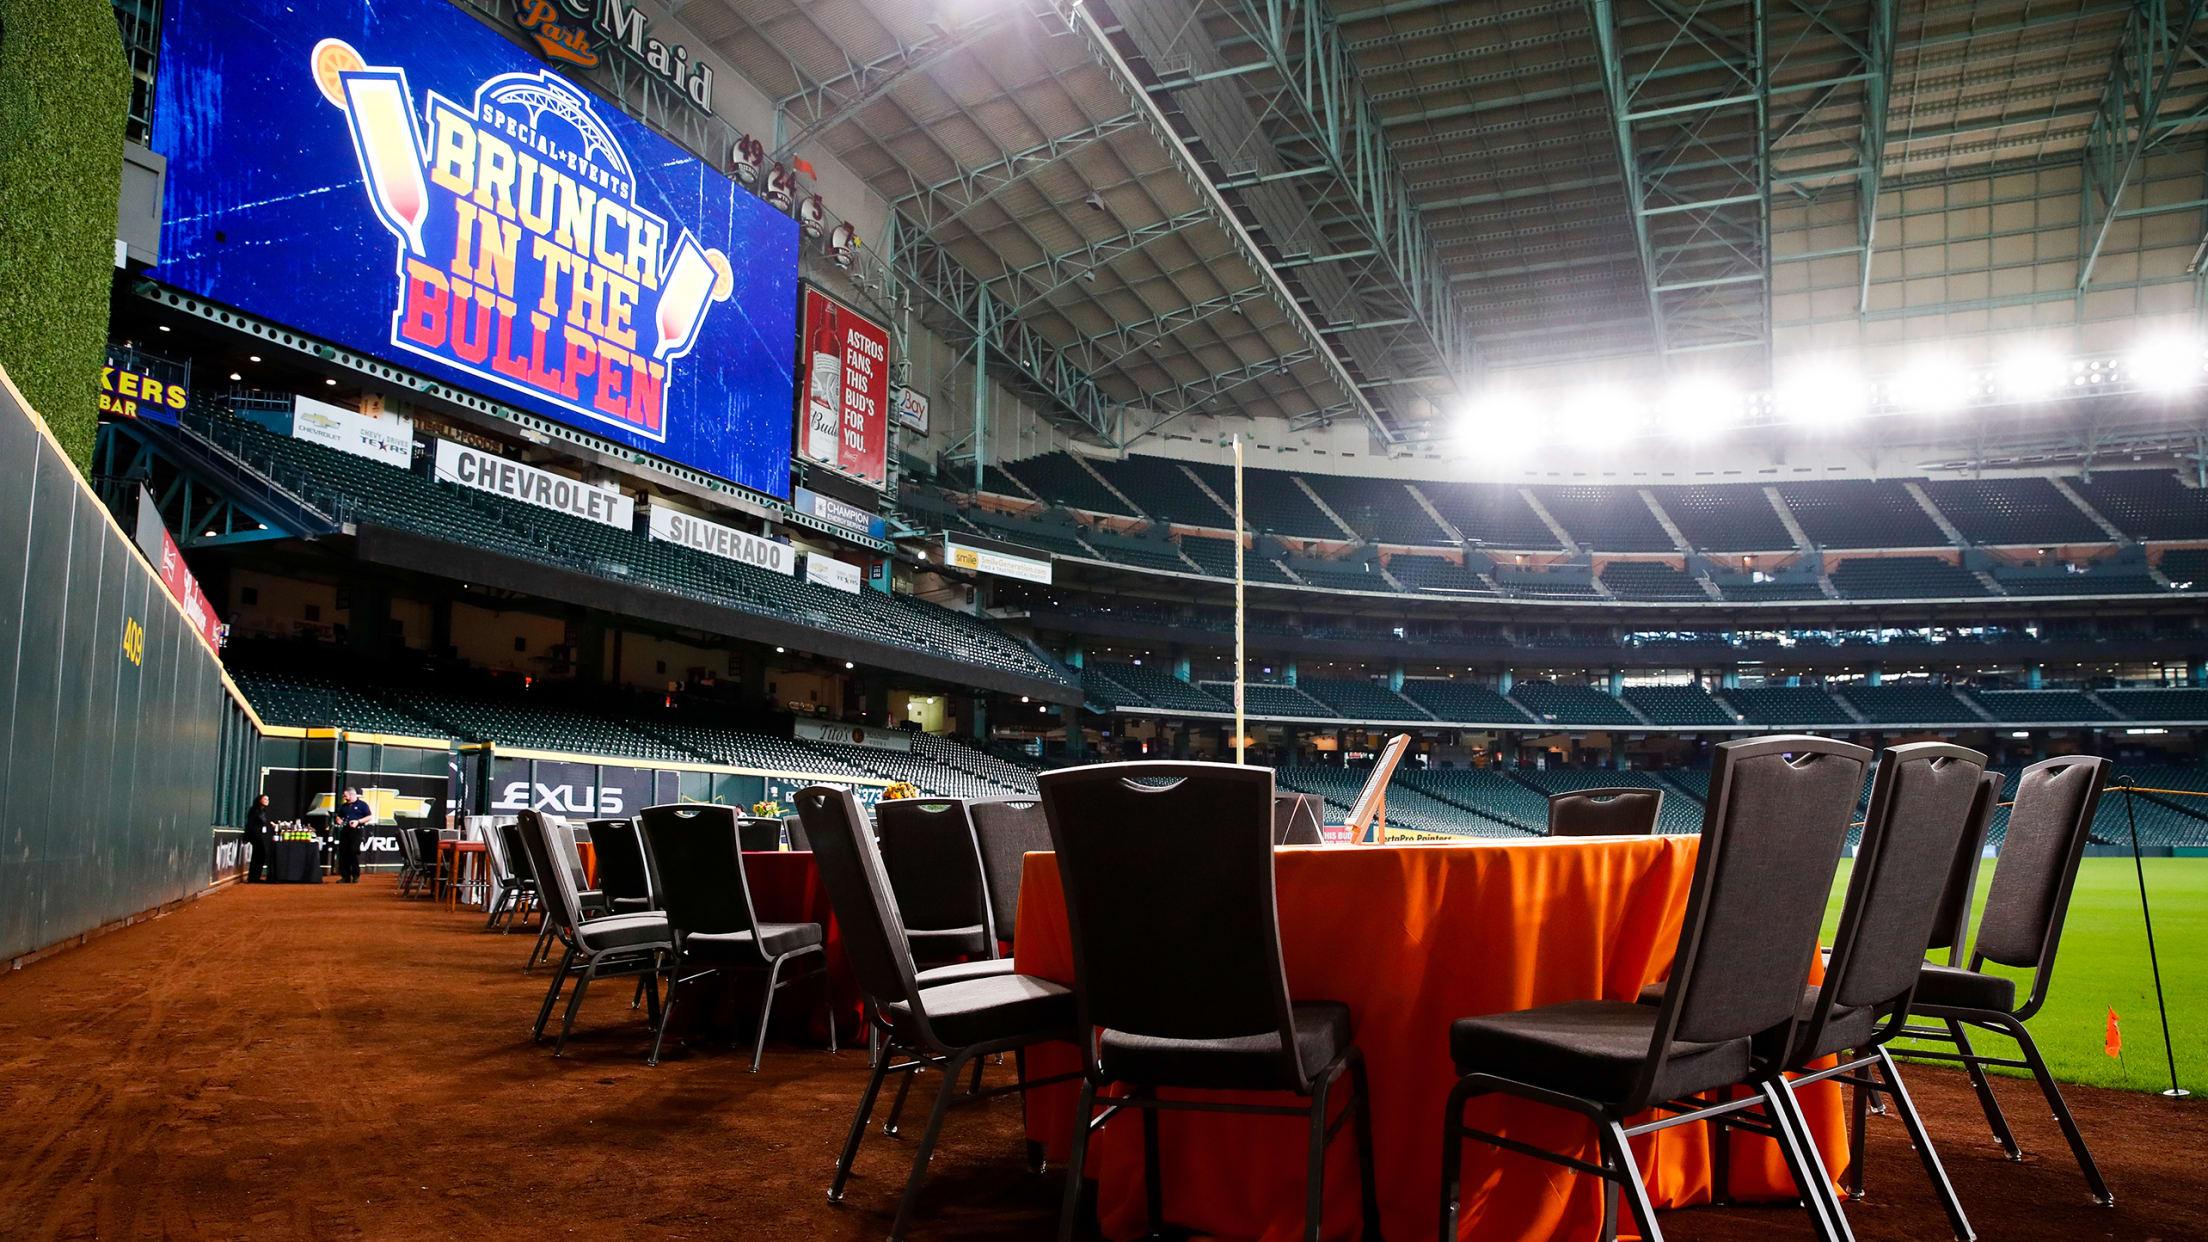 Minute Maid Park visitor guide: everything you need to know - Bounce